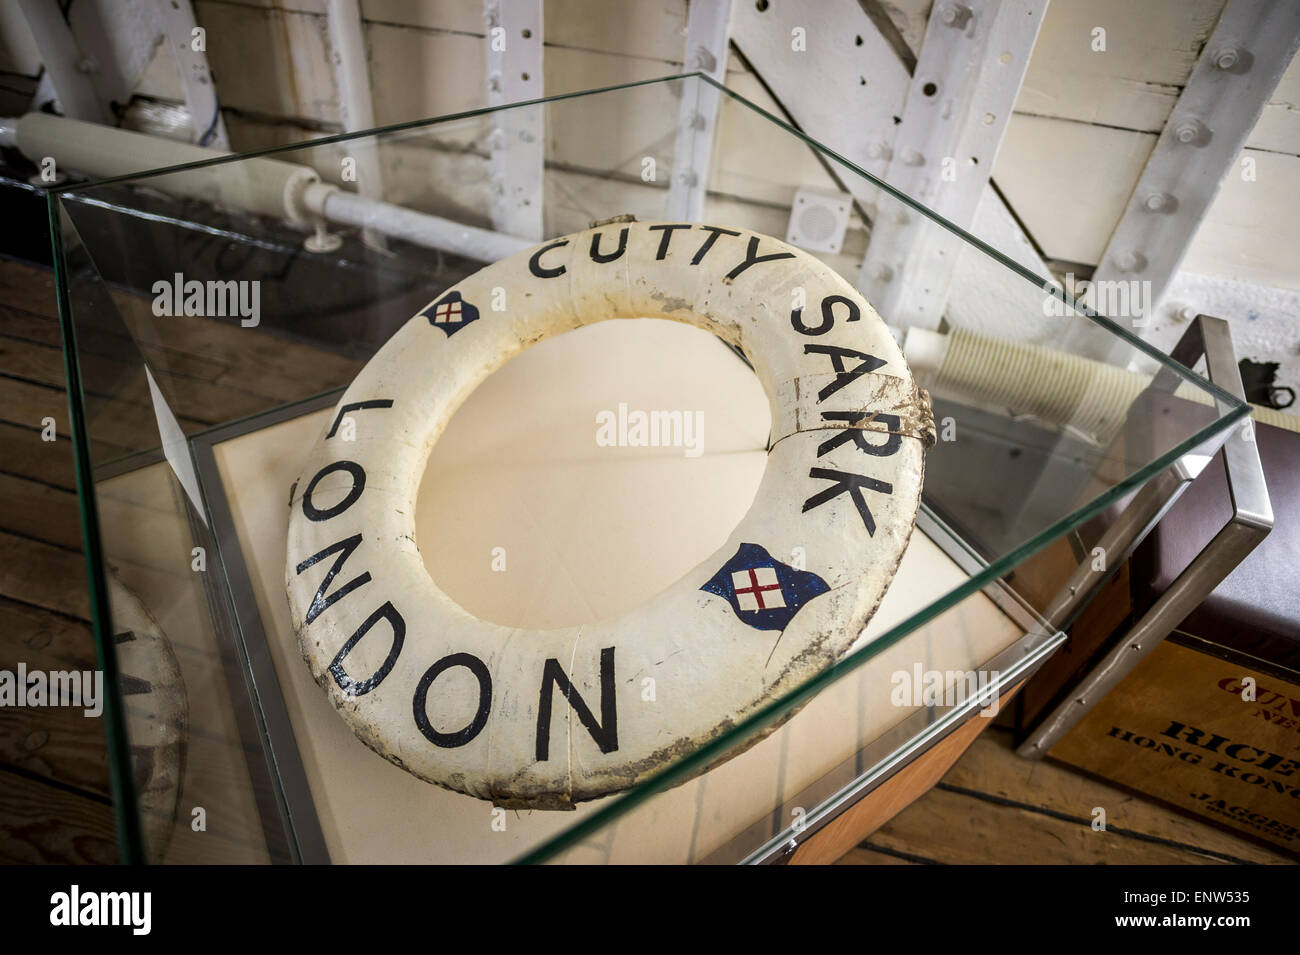 A life buoy on the Cutty Sark, a permanent museum exhibit on display in Greenwich, England Stock Photo